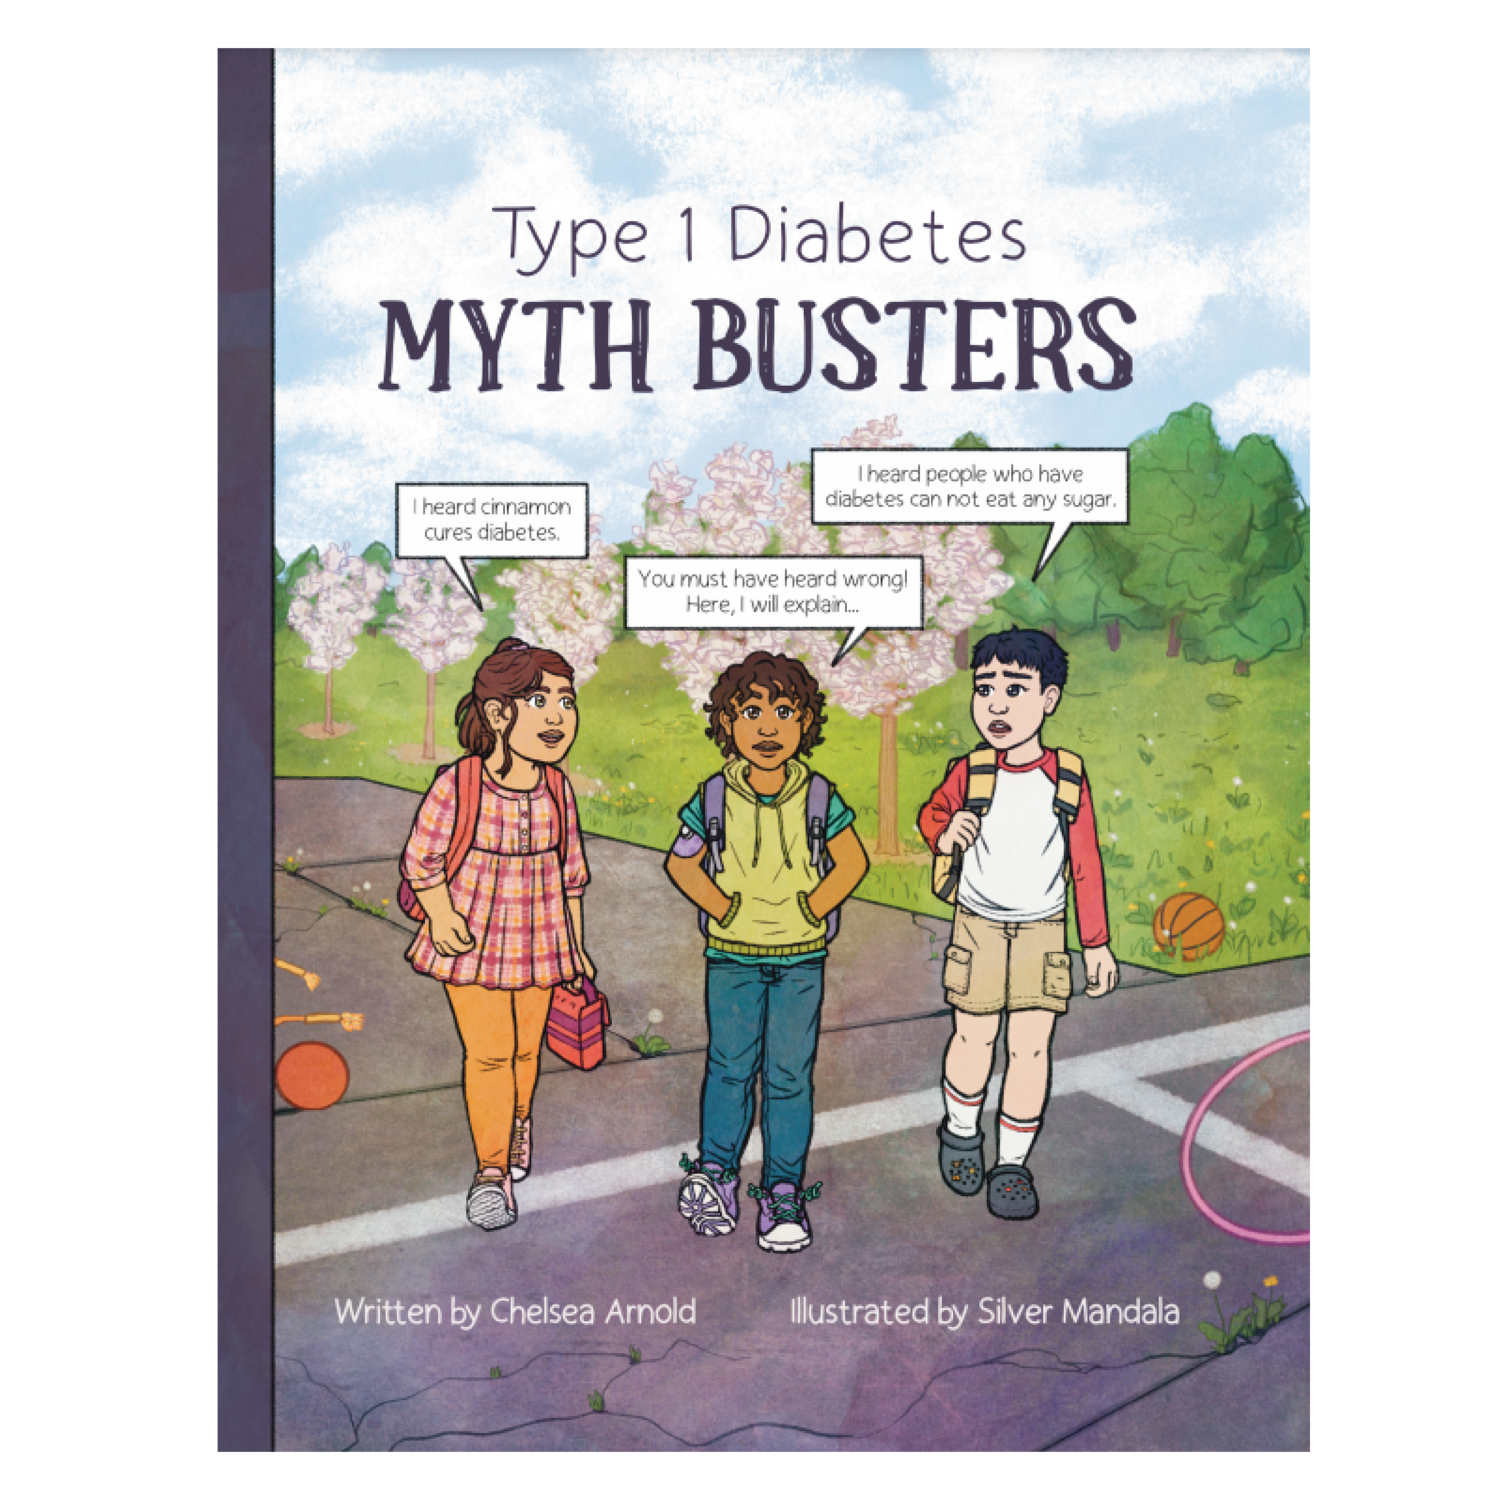 Type 1 Diabetes Myth Busters - Hardcover